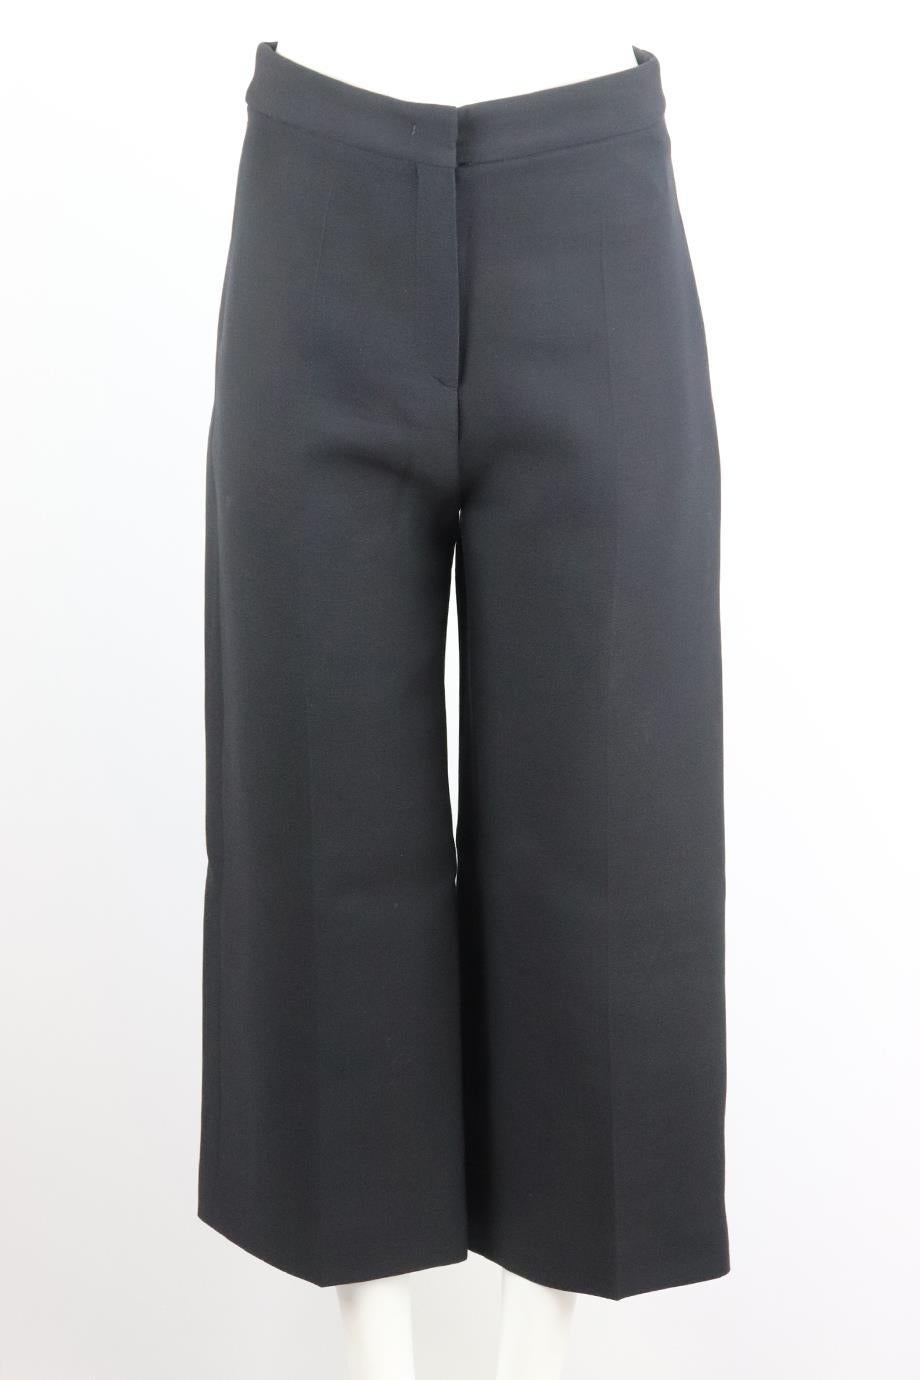 Fendi cropped wool and silk blend wide leg pants. Black. Hook and zip fastening at front. 77% Wool, 23% silk. Size IT 38 (UK 6, US 2, FR 34). Waist: 28 in. Hips: 40 in. Length: 35 in. Inseam: 23.5 in. Rise: 12 in
